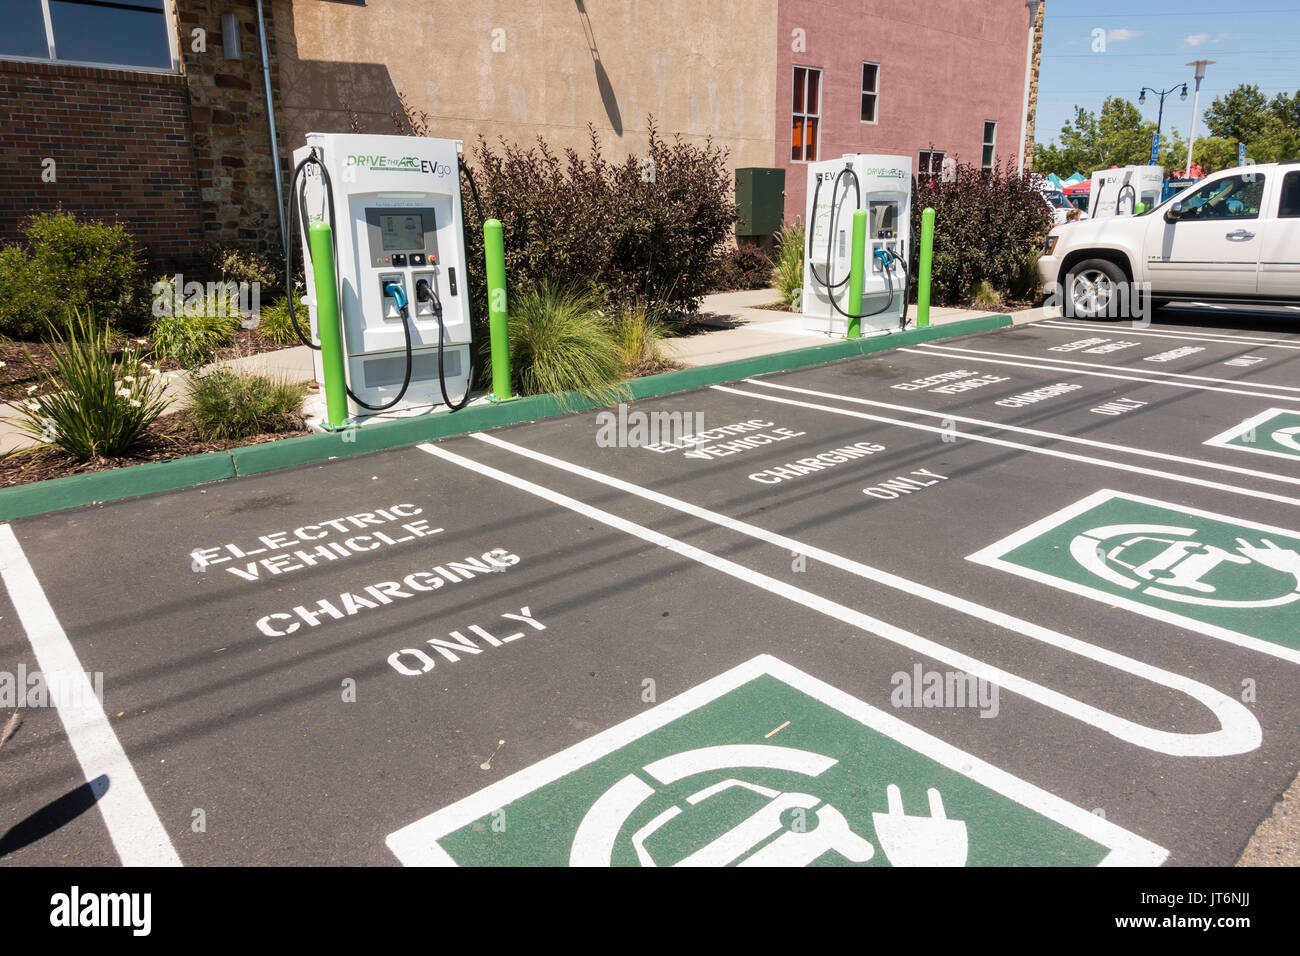 EV Electric Vehicle Charging Stations and parking spots at the front of